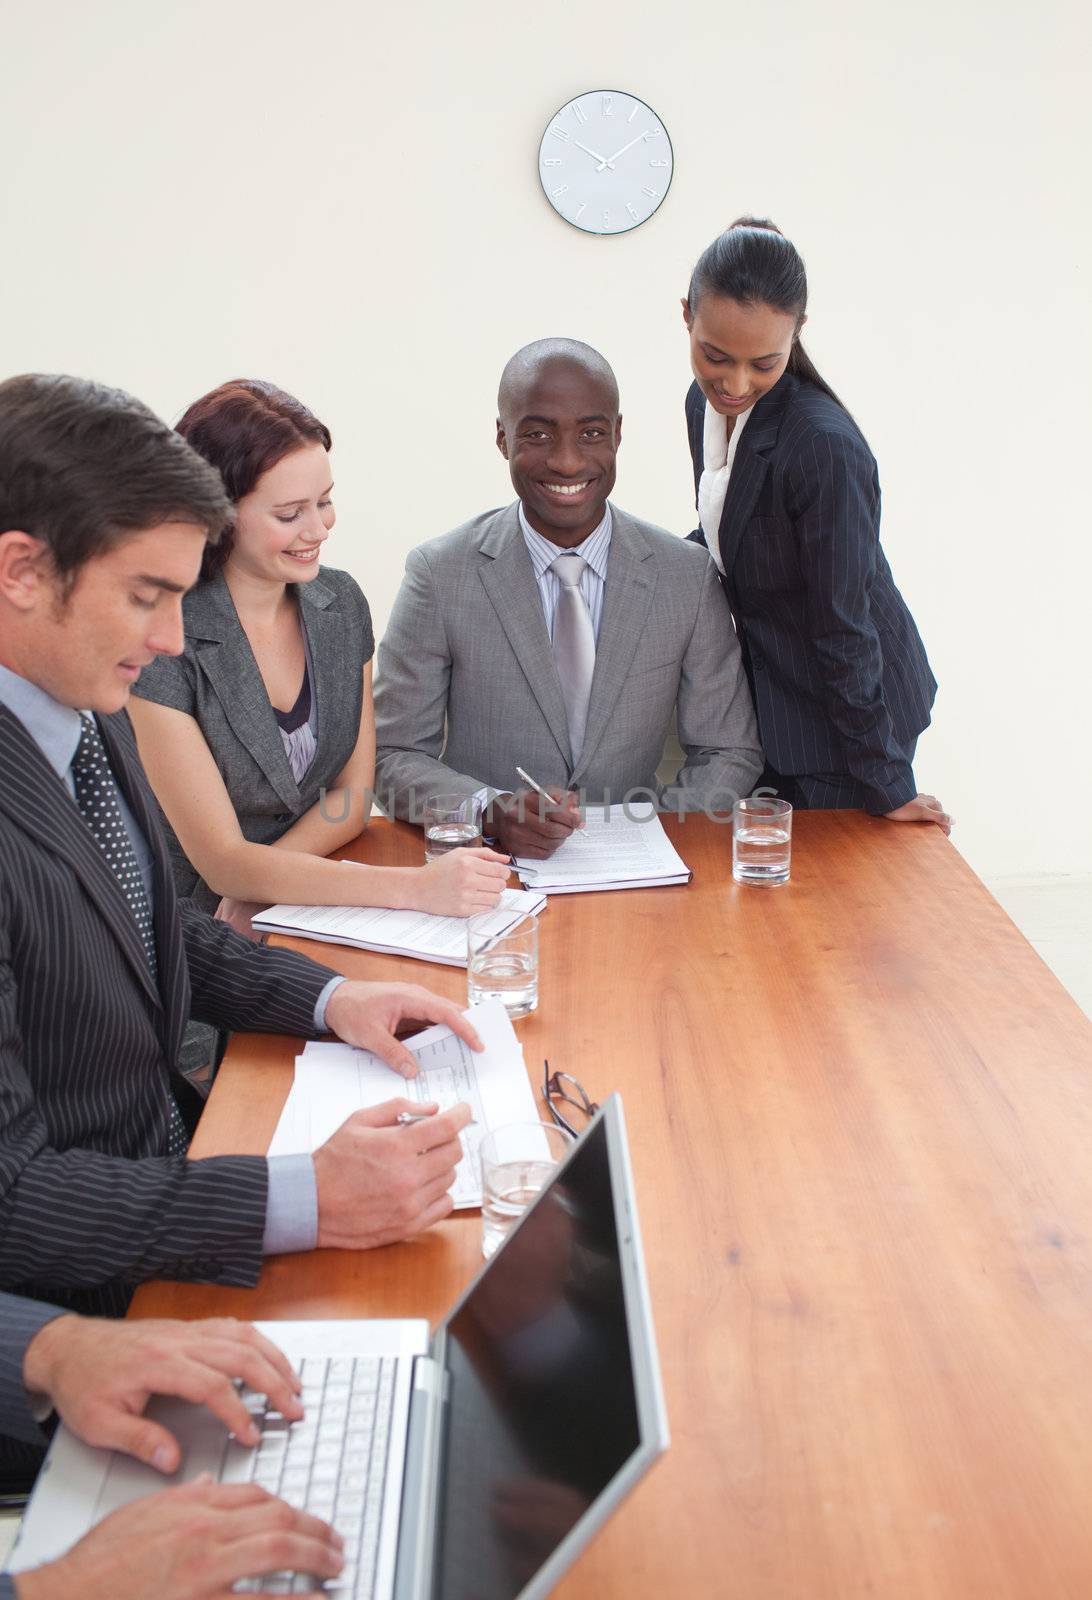 Business people working together in a meeting by Wavebreakmedia